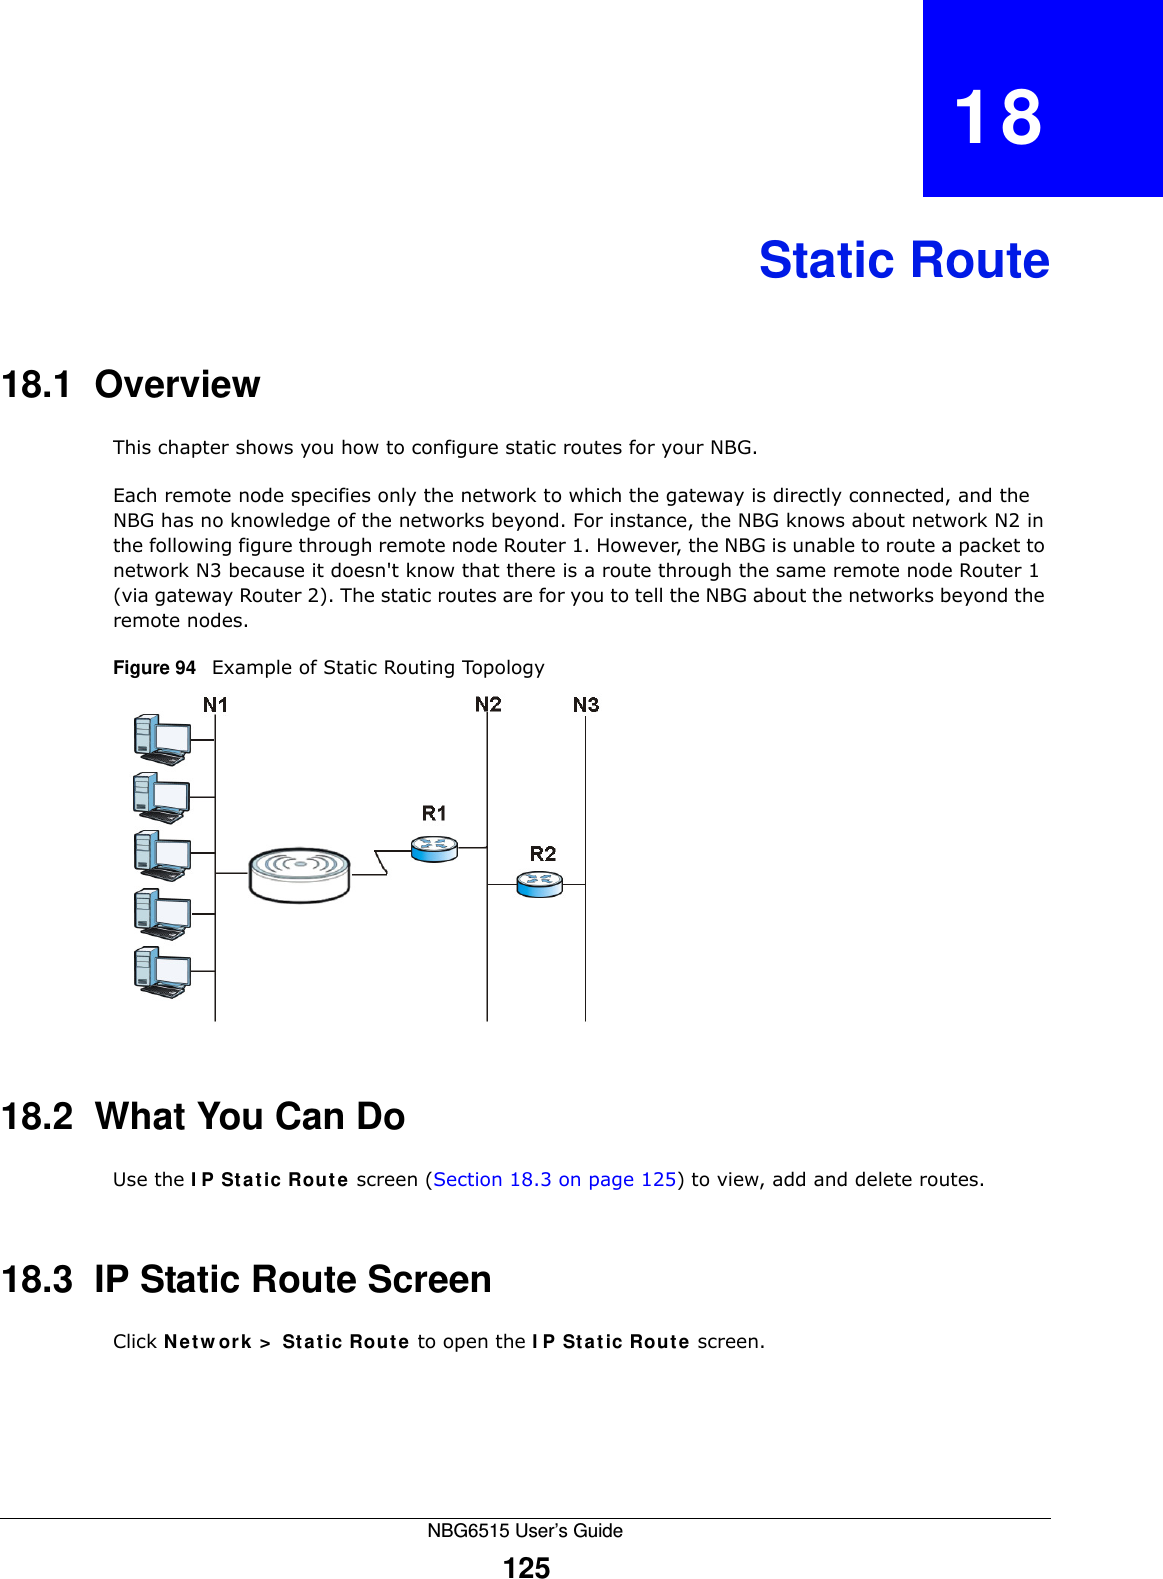 NBG6515 User’s Guide125CHAPTER   18Static Route18.1  Overview   This chapter shows you how to configure static routes for your NBG.Each remote node specifies only the network to which the gateway is directly connected, and the NBG has no knowledge of the networks beyond. For instance, the NBG knows about network N2 in the following figure through remote node Router 1. However, the NBG is unable to route a packet to network N3 because it doesn&apos;t know that there is a route through the same remote node Router 1 (via gateway Router 2). The static routes are for you to tell the NBG about the networks beyond the remote nodes.Figure 94   Example of Static Routing Topology18.2  What You Can DoUse the IP Static Route screen (Section 18.3 on page 125) to view, add and delete routes.18.3  IP Static Route Screen Click Network &gt; Static Route to open the IP Static Route screen. 